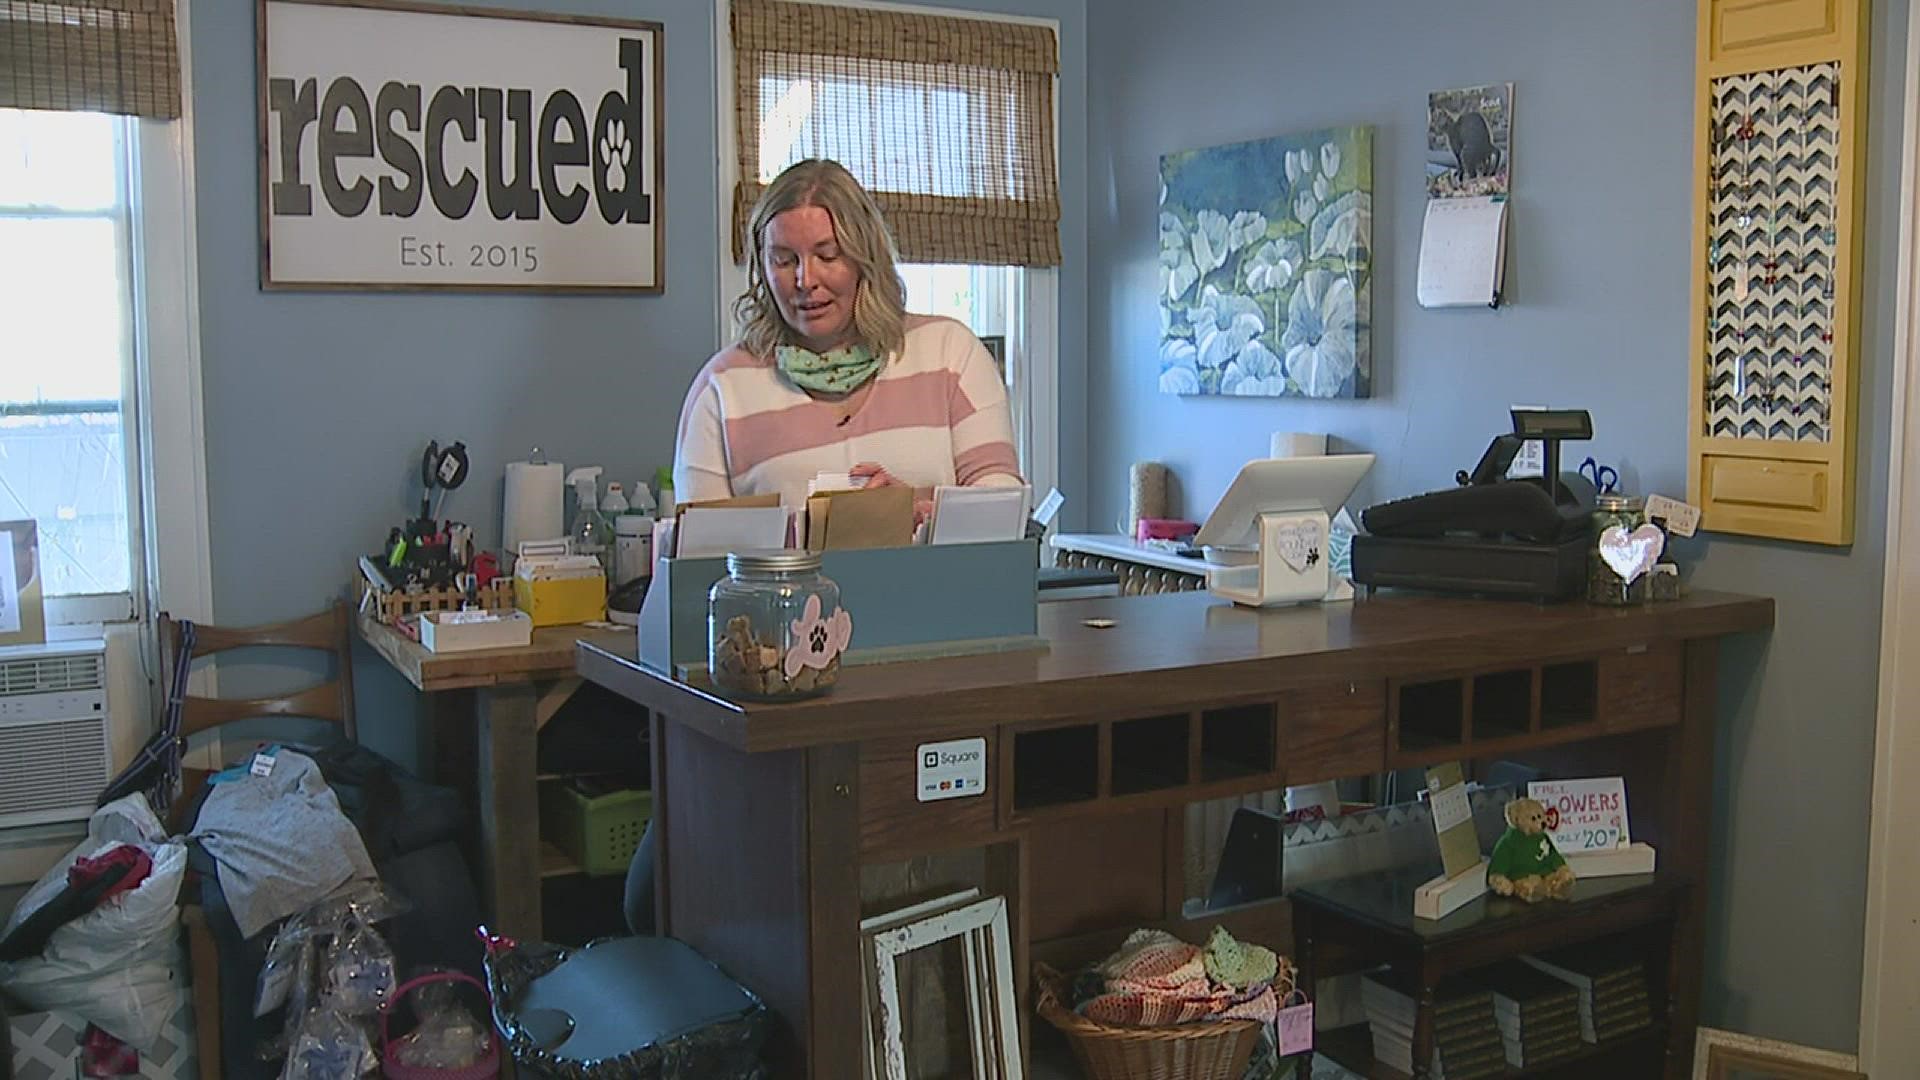 Erin Granet is "Multiplying Good" by using her resale shop's profits to help pets in need.